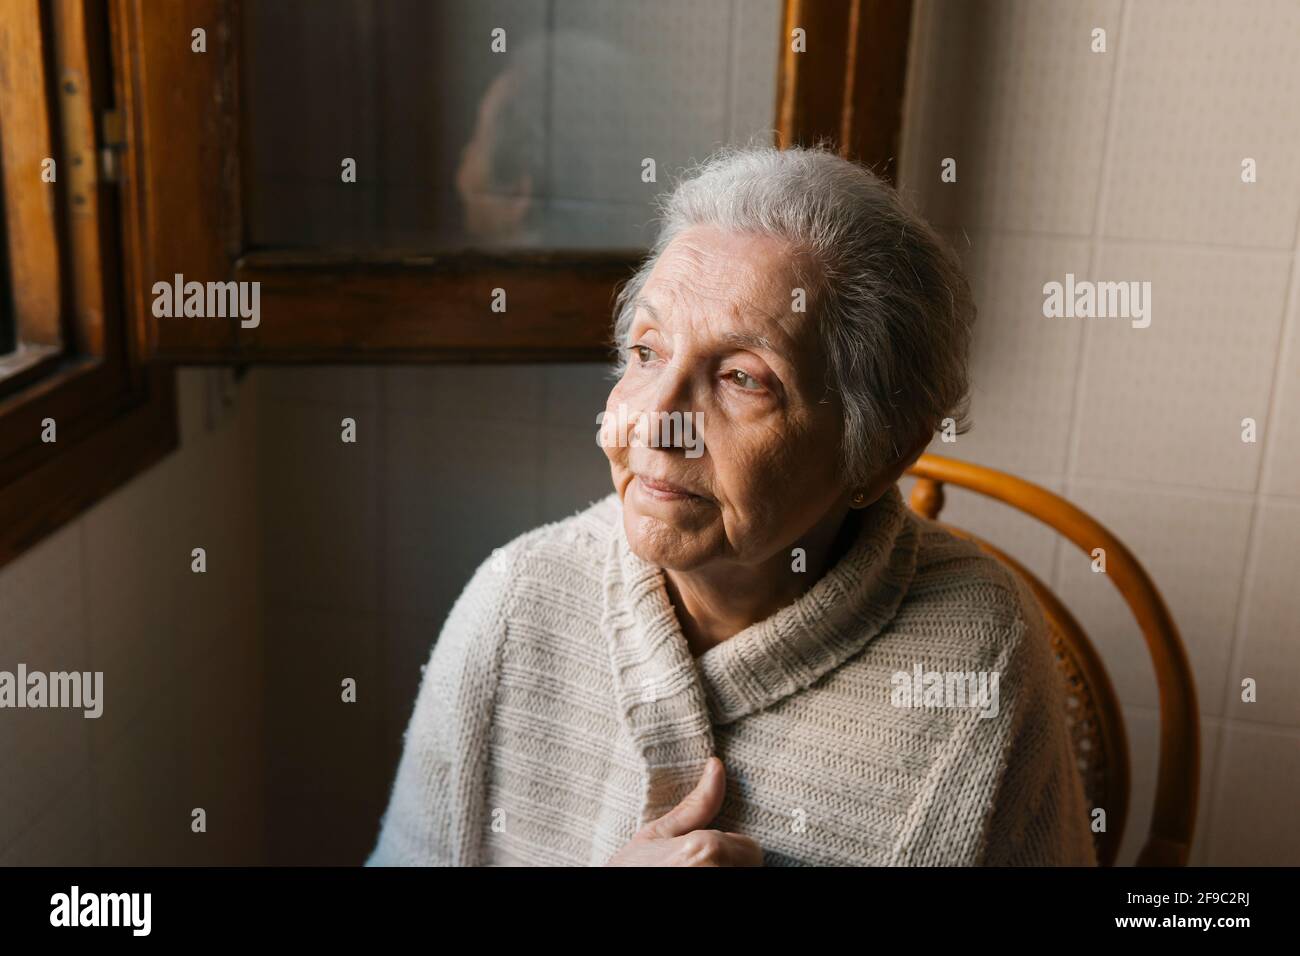 portrait of elderly woman sitting looking out the window Stock Photo